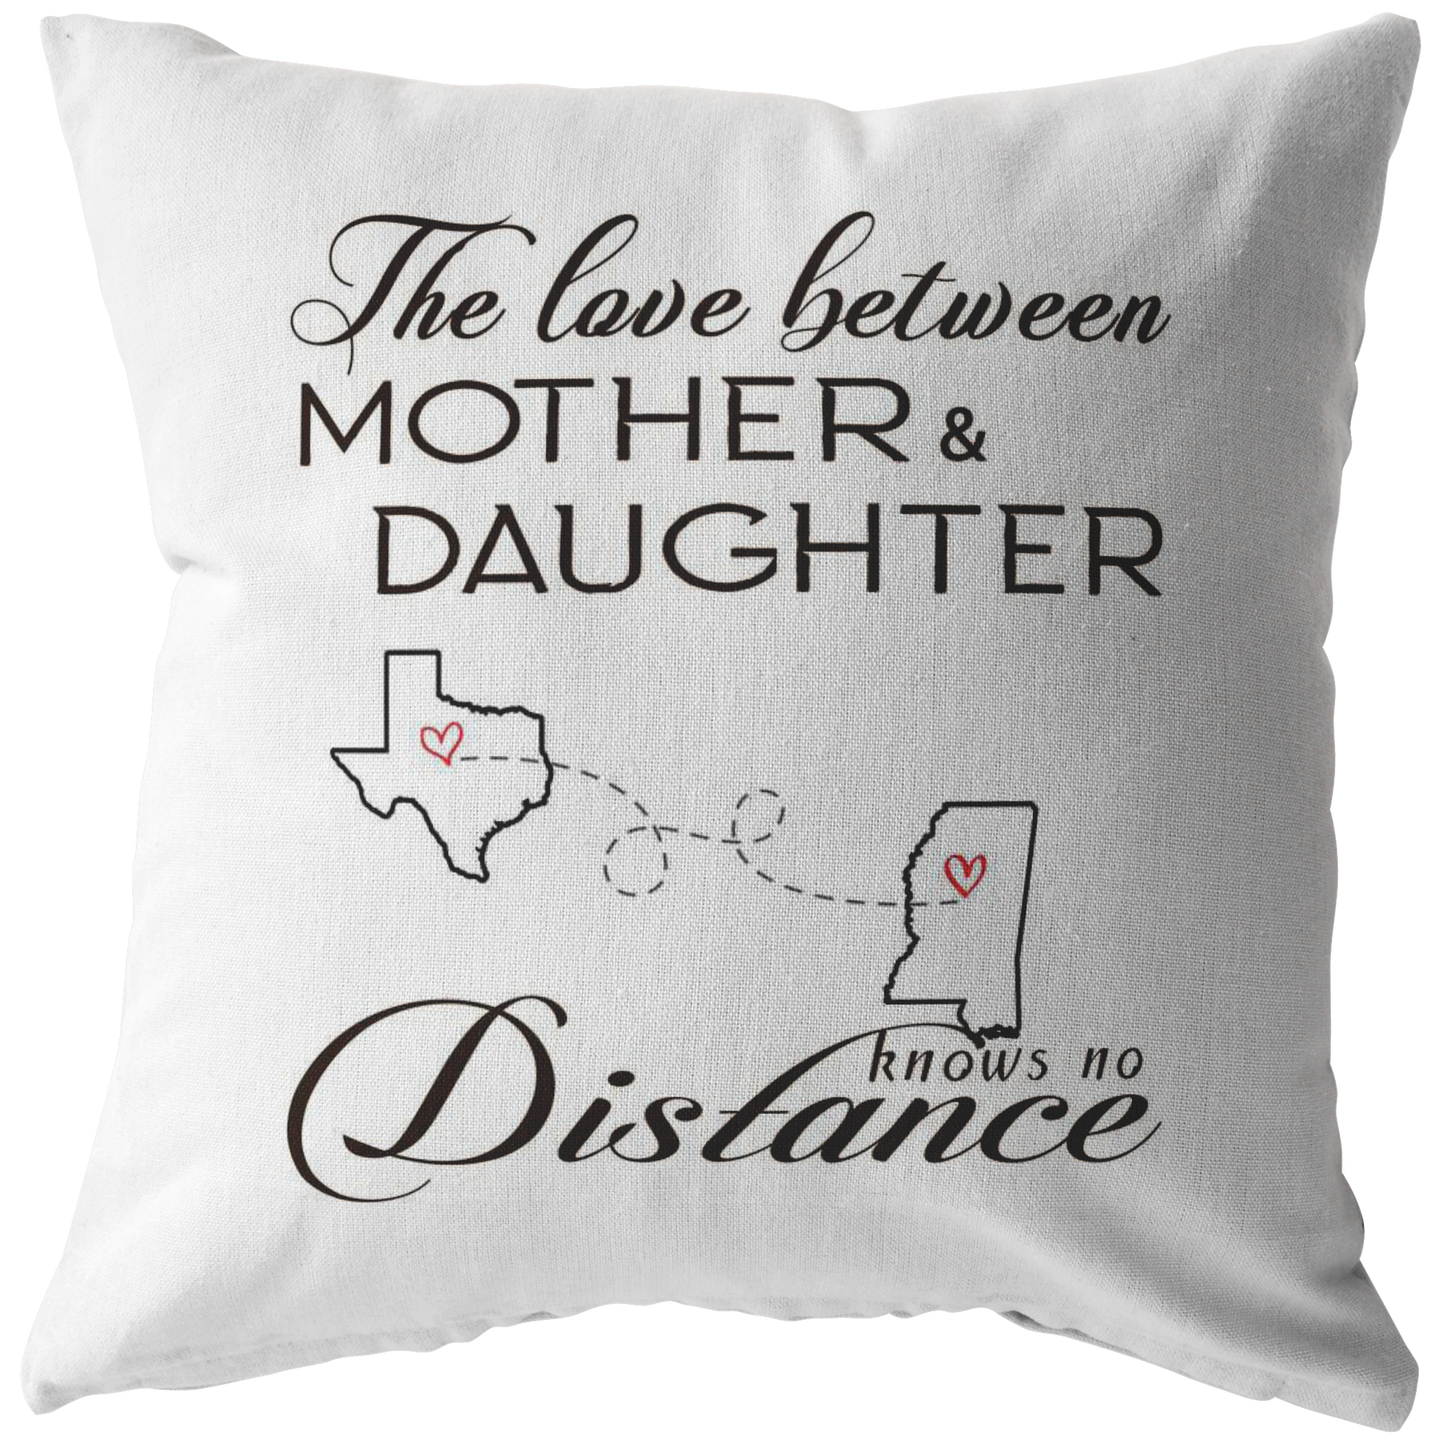 ND-pl20862598-sp-24275 - [ Texas | Mississippi ]Mothers Day Pillow Covers 18x18 - The Love Between Mother An